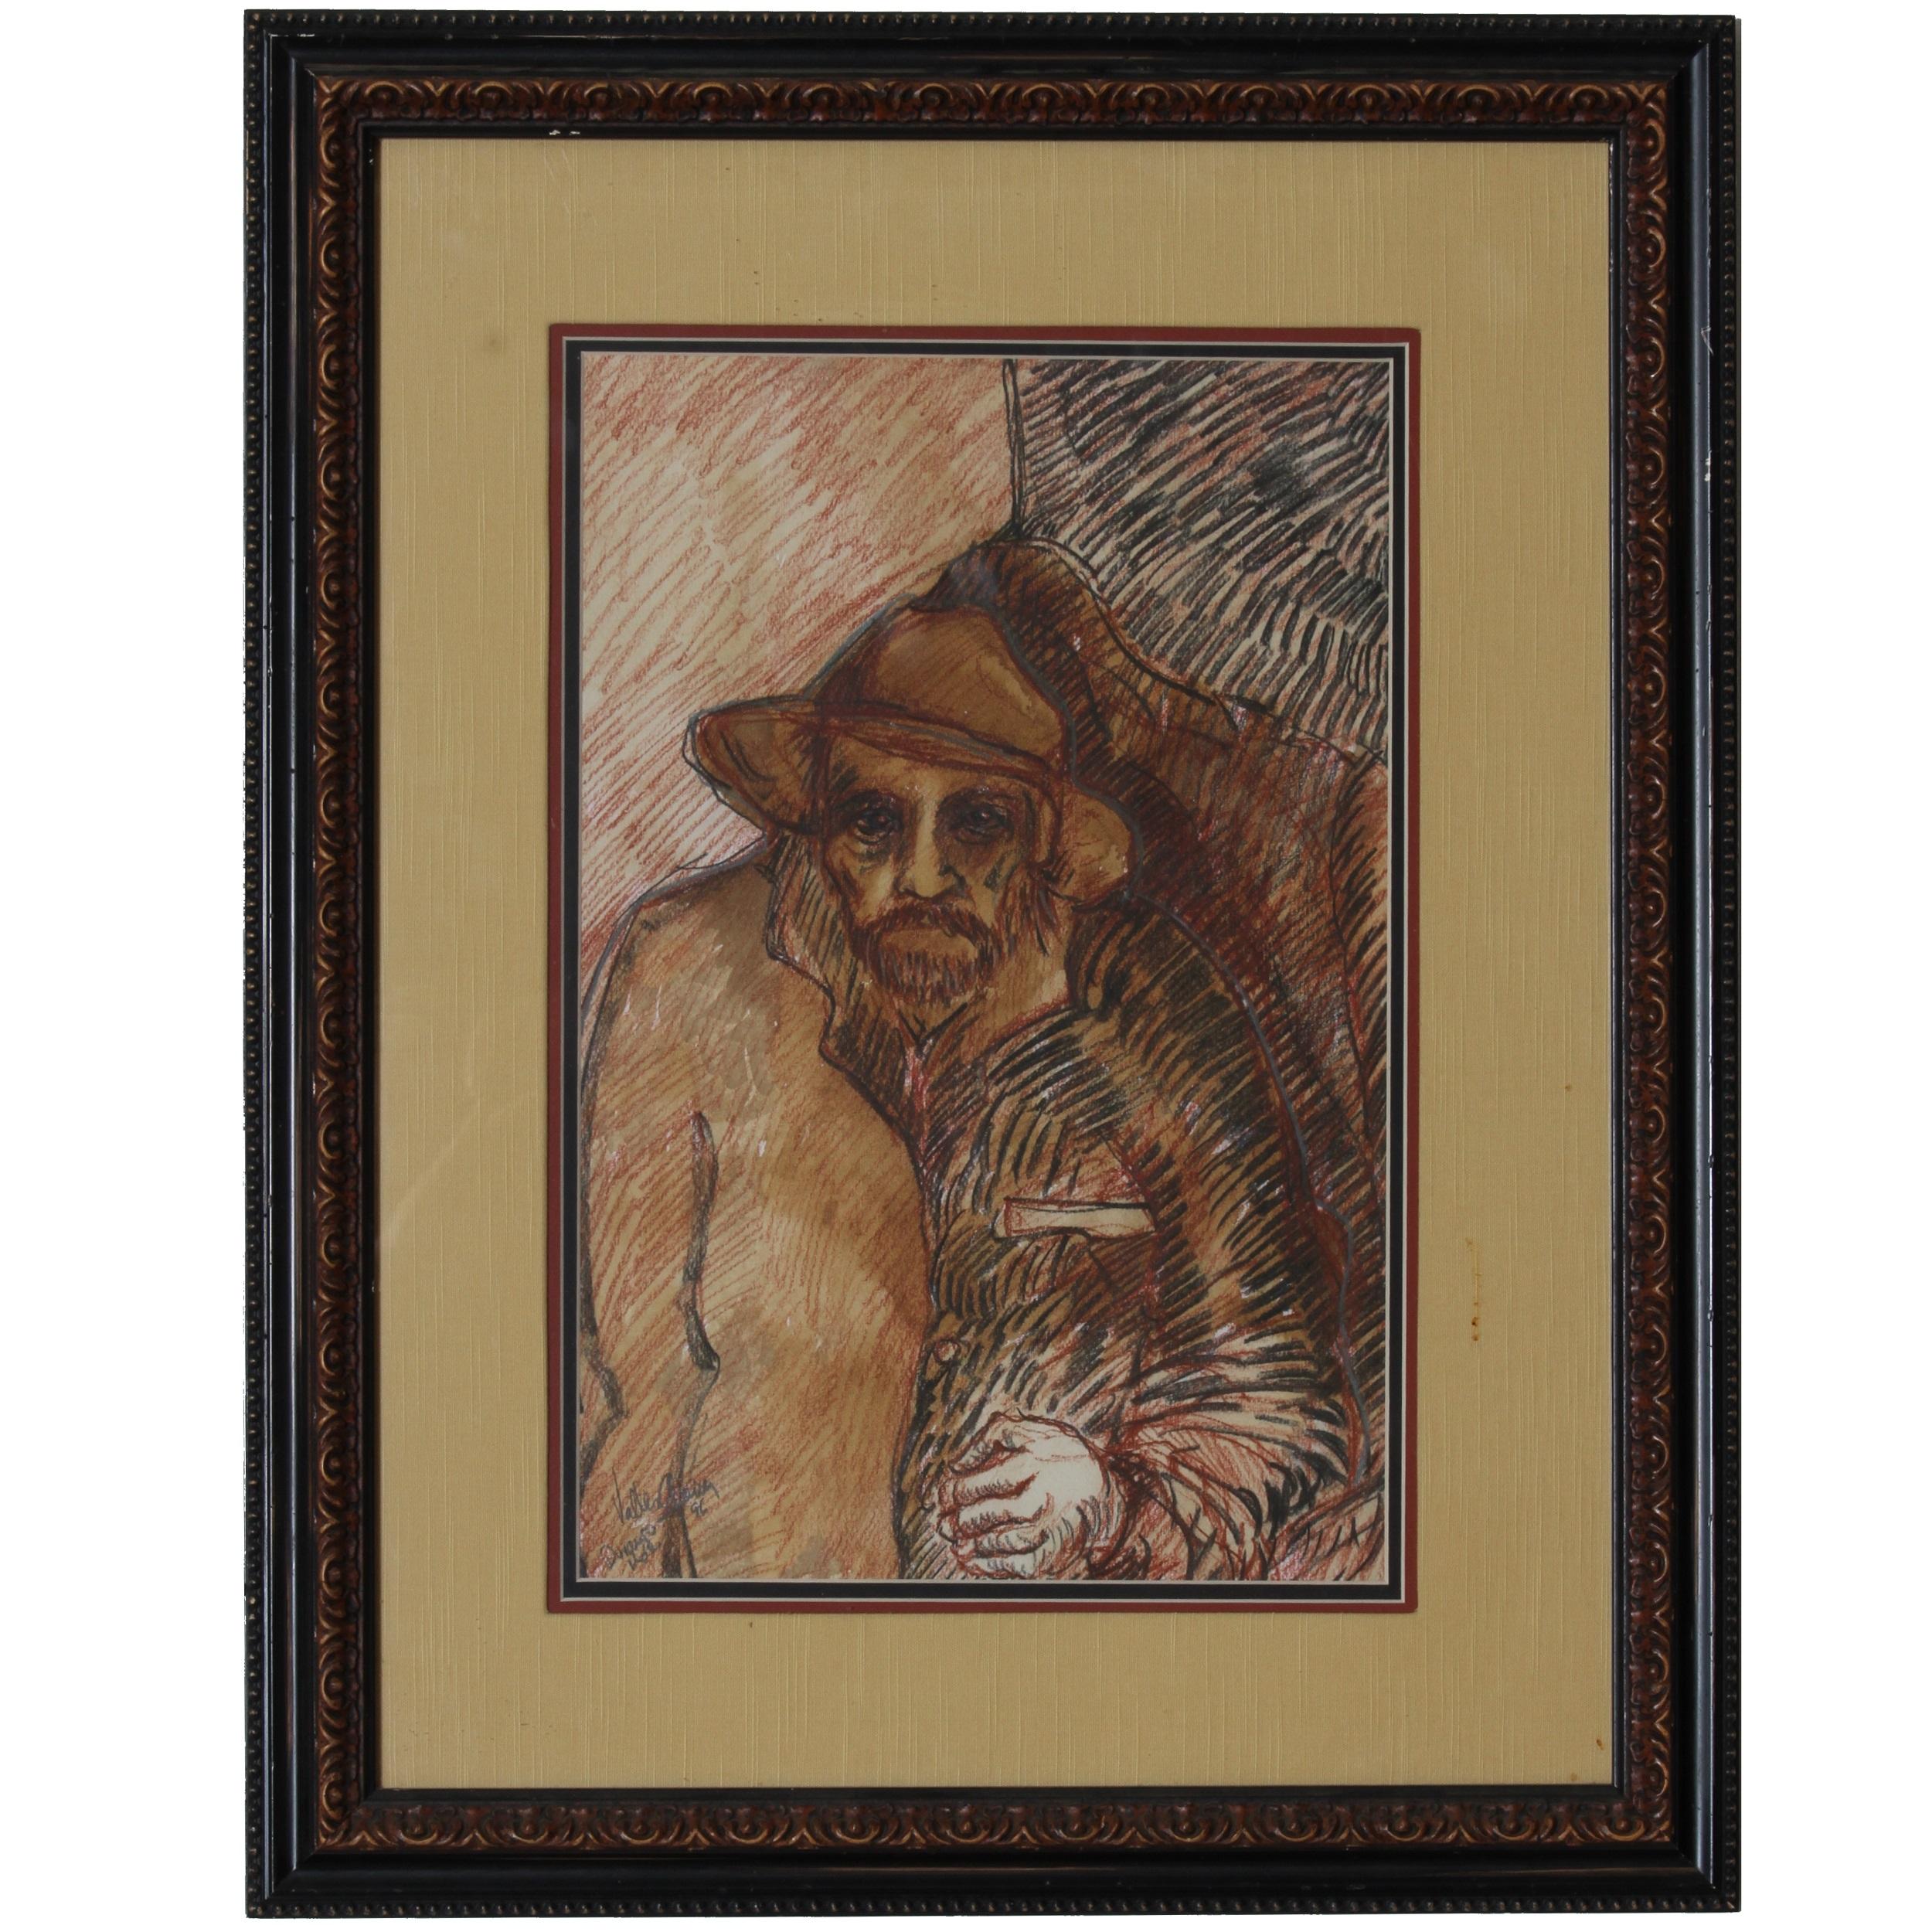 Lot of 2 Pieces by Manuel Valles Gomez: 1 Charcoal Drawing, 1 Watercolor/Gouache

MANUEL VALLES GOMEZ - Drawing

Untitled (Portrait of Old Man, Durango, Mexico)
Signed, Annotated, Dated, "Valles Gomez, Durango, Mex. 96" lower left
Charcoal on